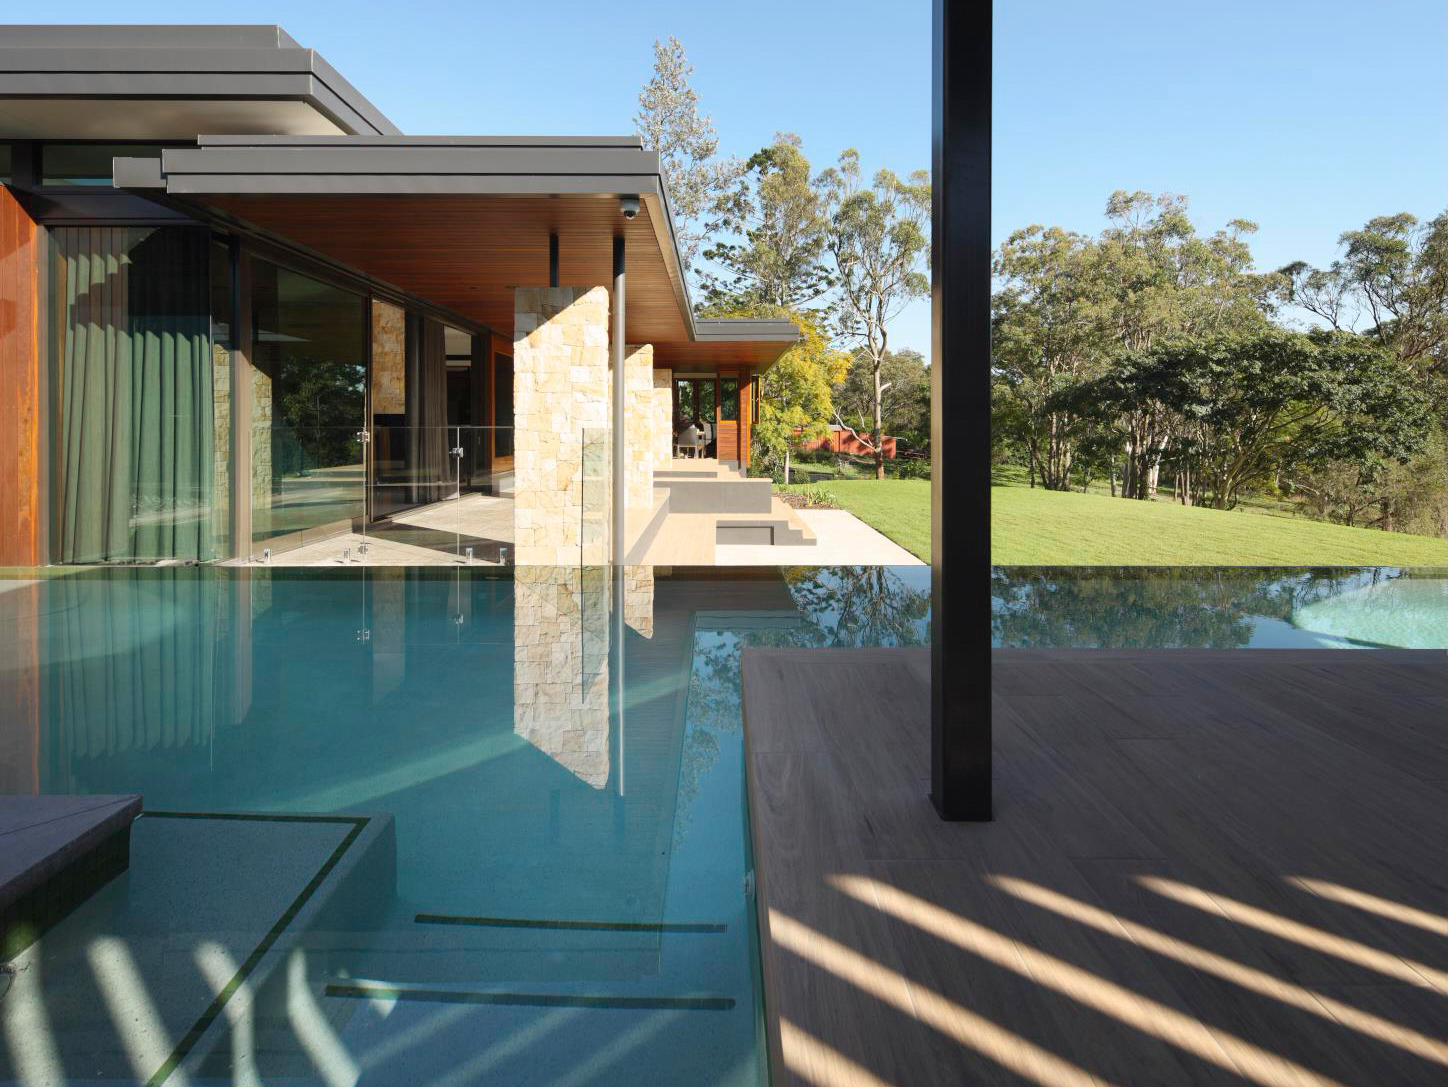 Infinity pool with view to Killcare sandstone random ashlar columns in background